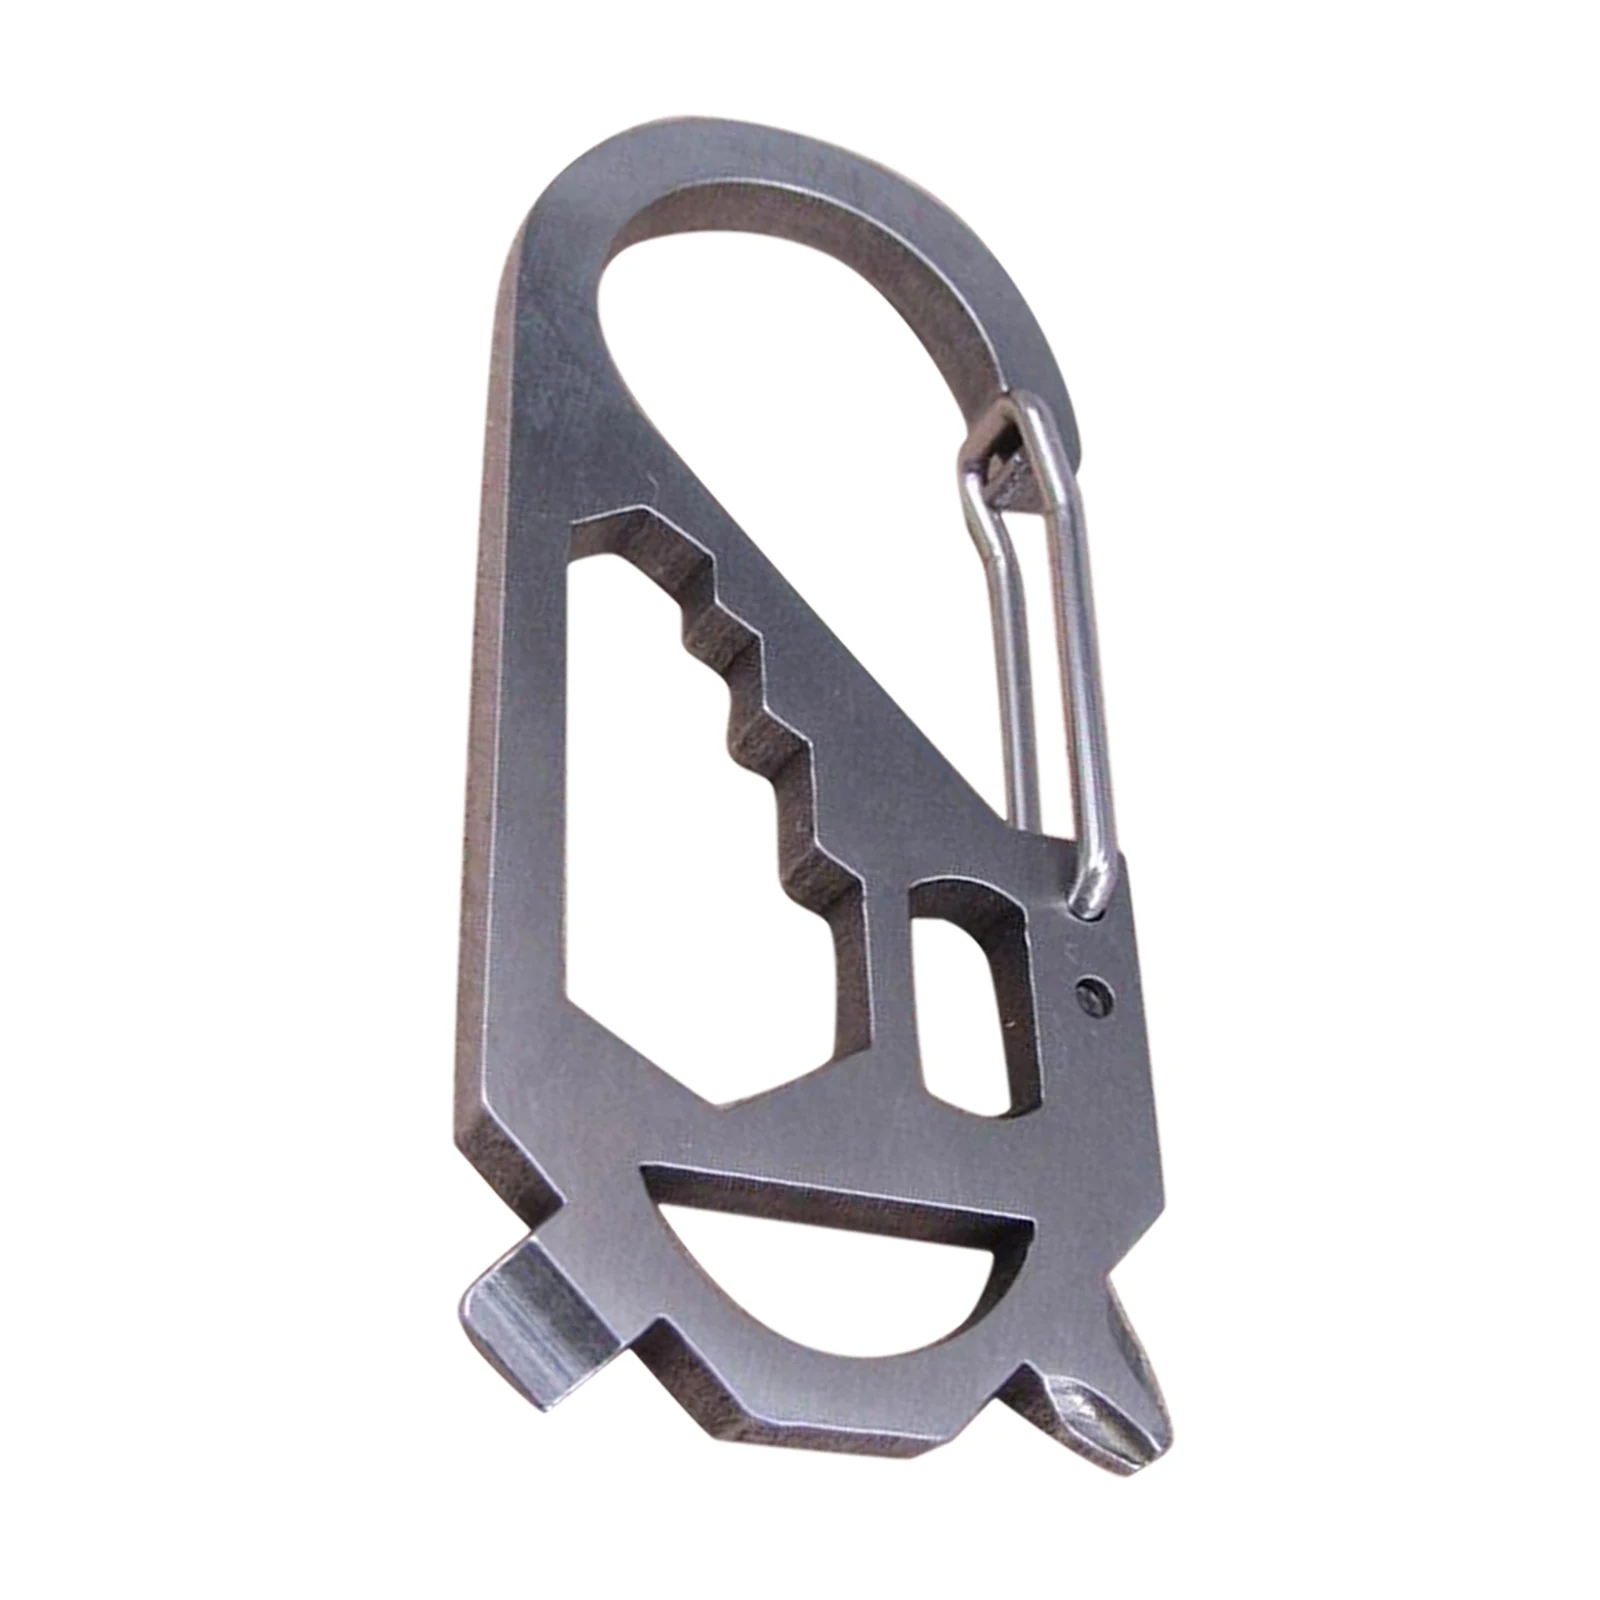 Snap Hook 420 Stainless Steel Carabiner Camping Climbing Boat Sail 7 mm